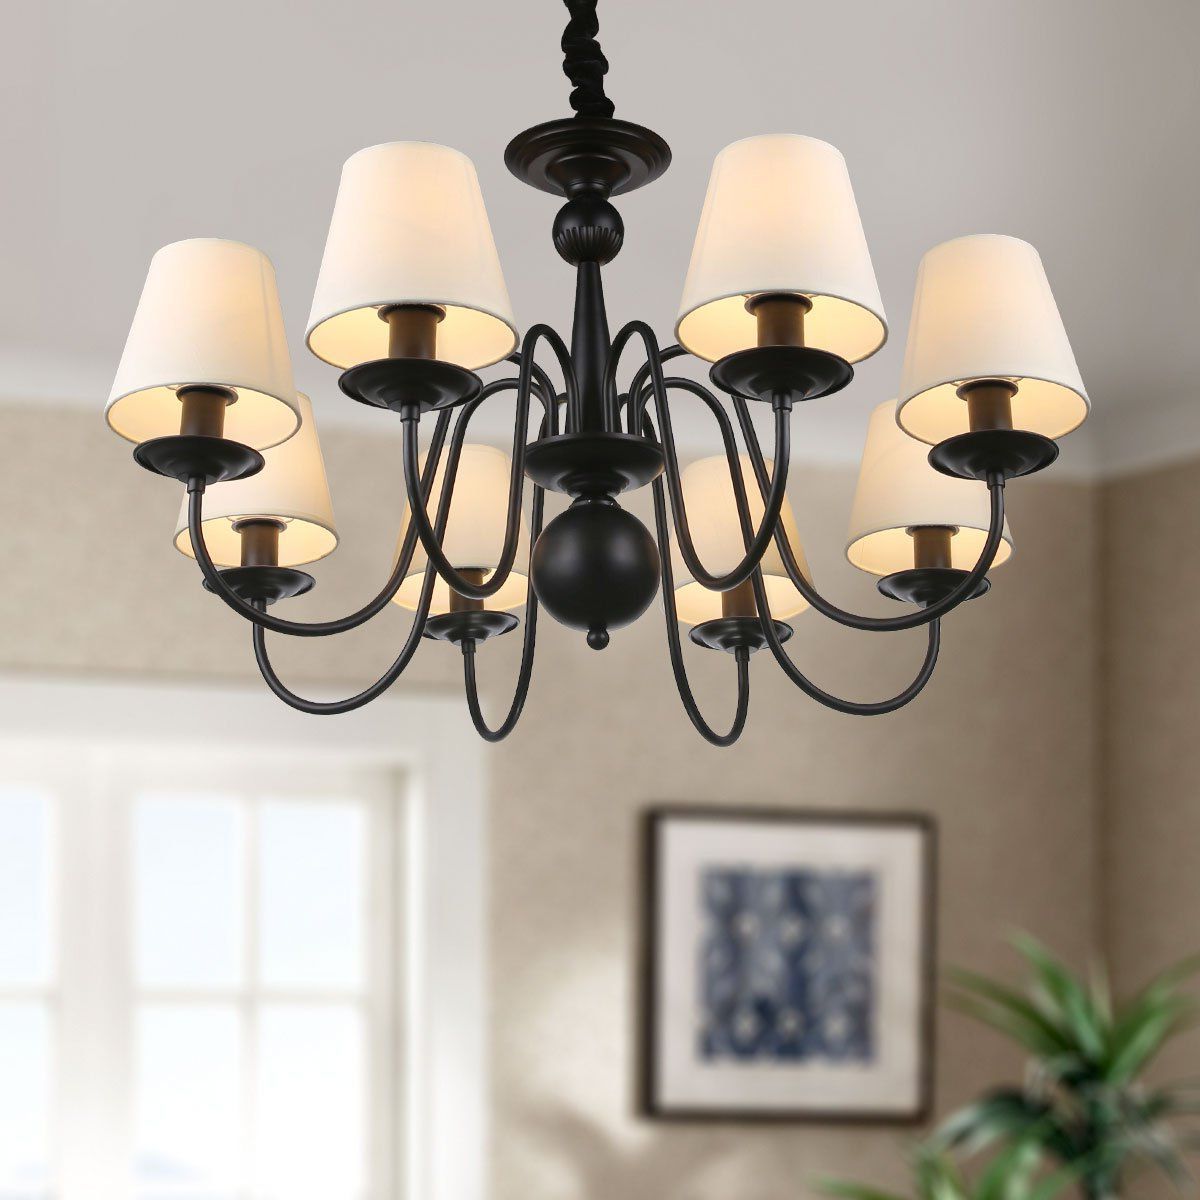 8 Light Black Wrought Iron Chandelier With Cloth Shades (e With Regard To Popular Black Iron Eight Light Minimalist Chandeliers (View 12 of 20)